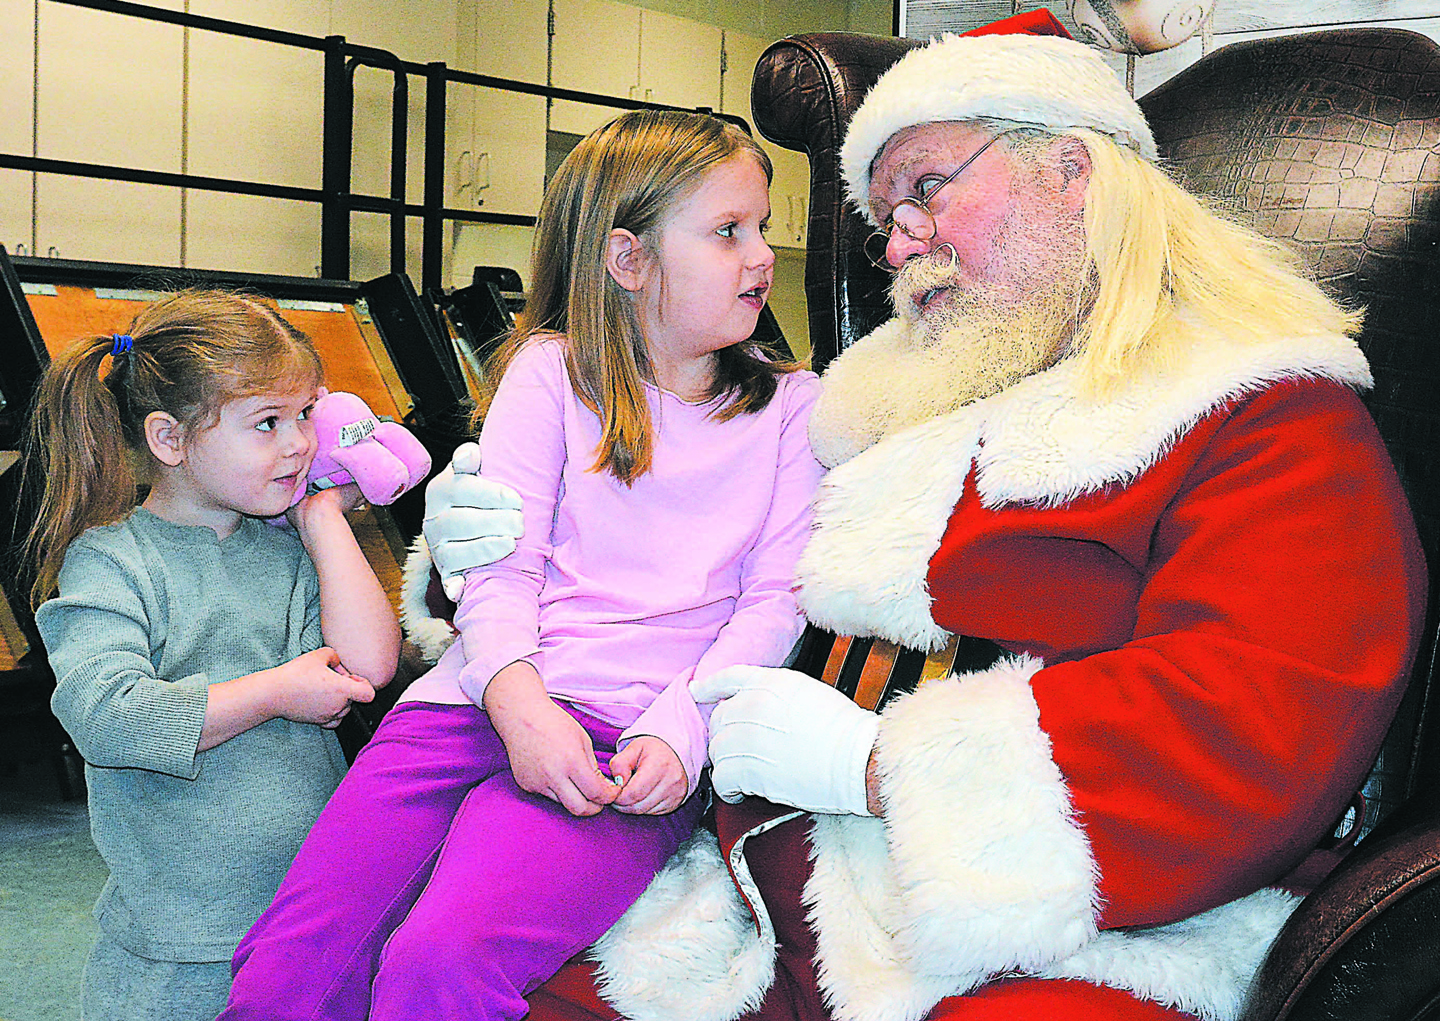 Visiting with the one and only Santa Claus are sisters Lena Starzyk (left), 3, and Sophia, 6. Sophia is a first-grader at Lakeville Elementary School. Photo by C.J. Carnacchio.